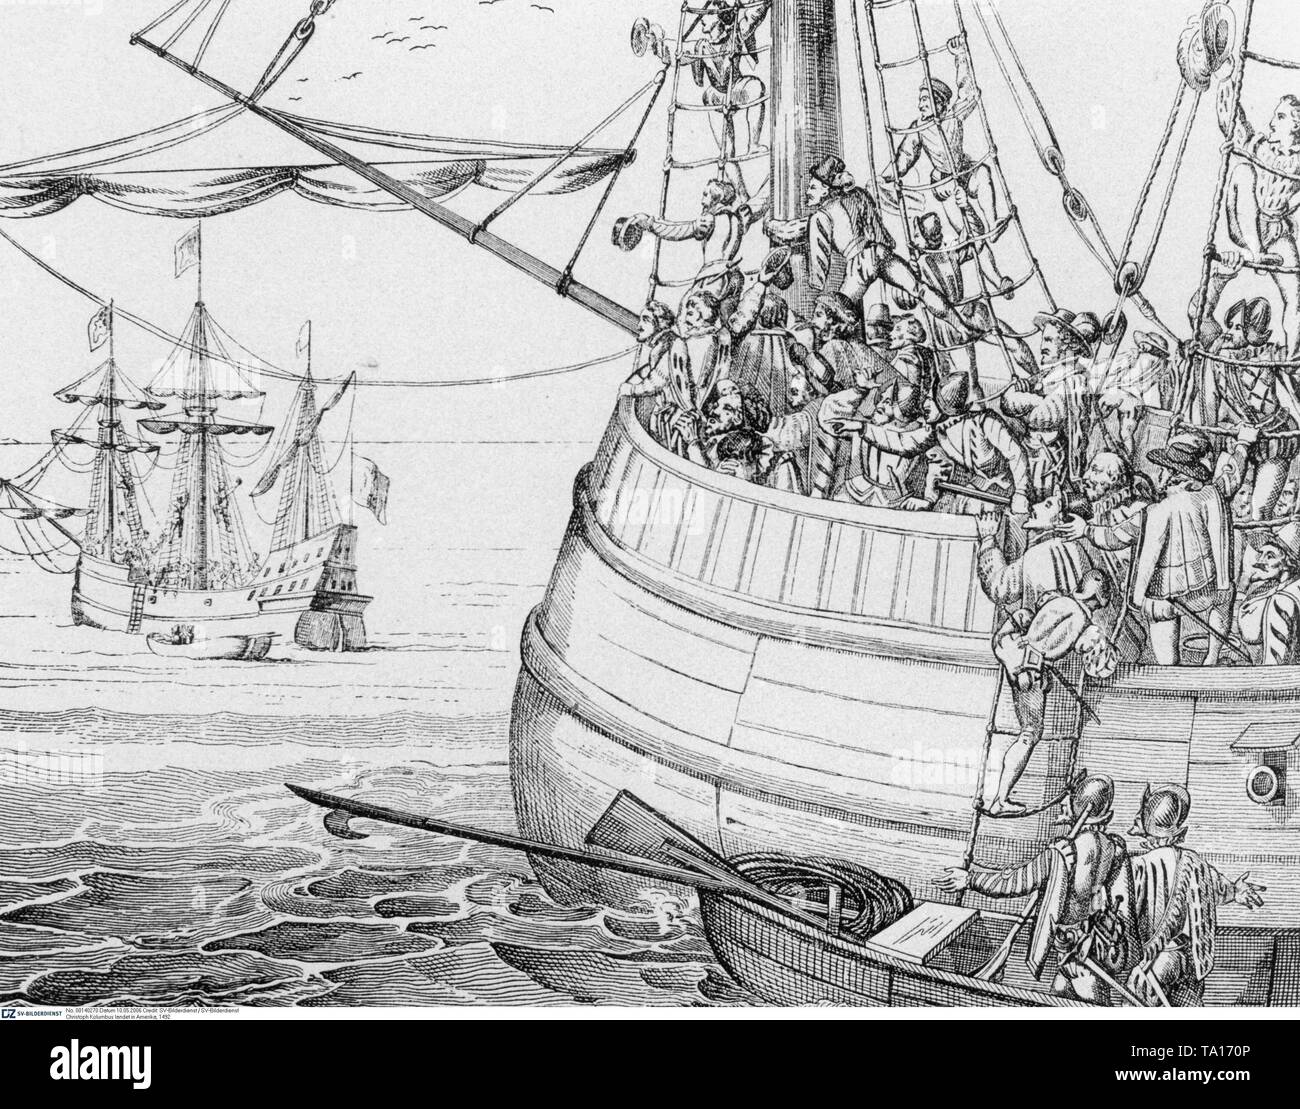 Italian navigator in the service of Spain, Christopher Columbus on his first landing in America. The illustration shows Columbus and his Spanish crew shortly before landing on the Bahamian island of San Salvador on October 12, 1492 Stock Photo